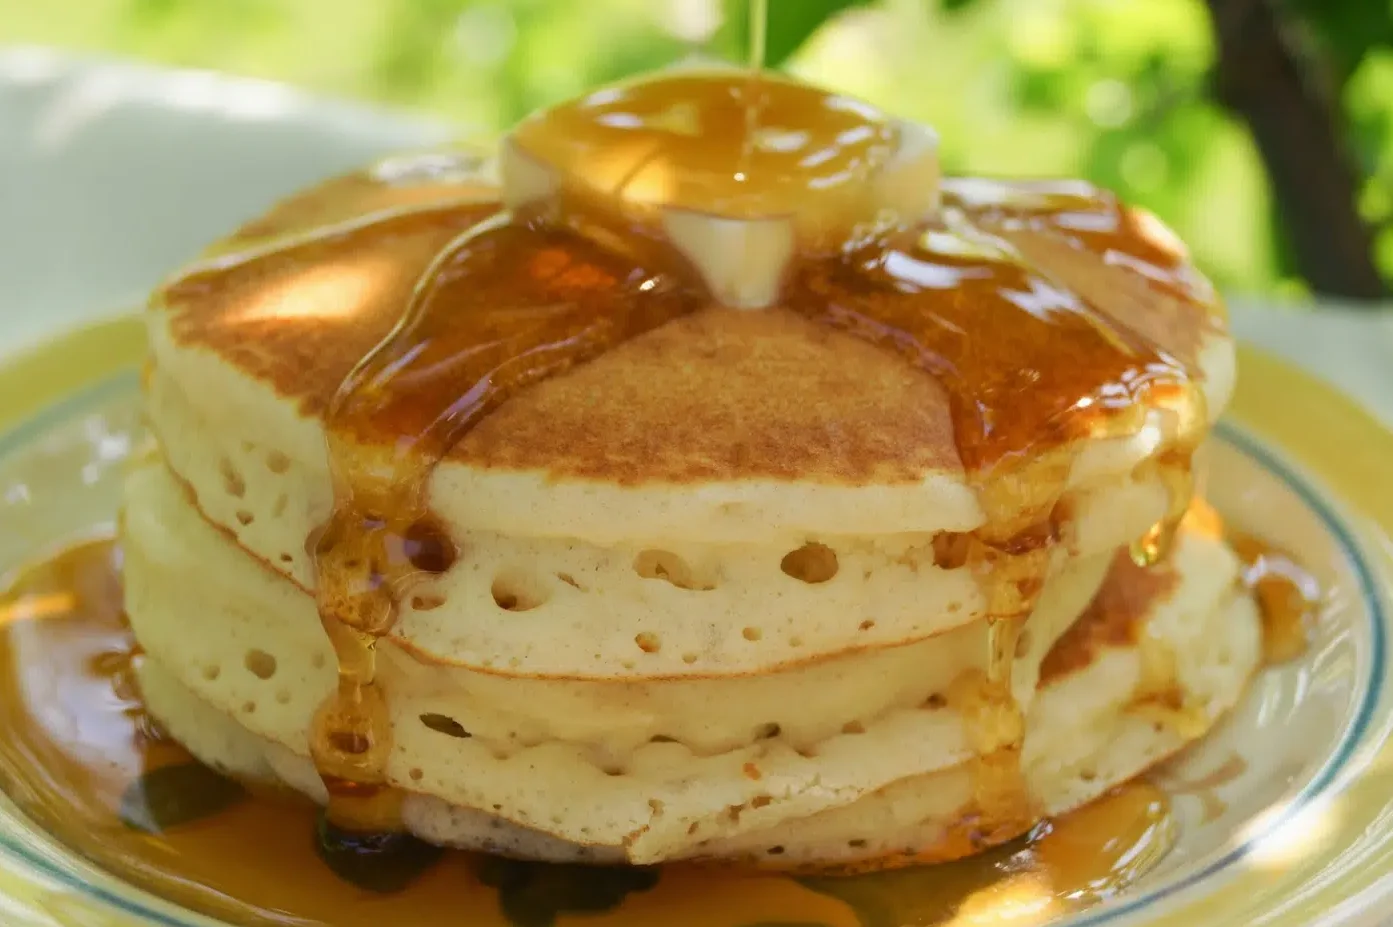 The image displays a stack of fluffy pancakes on a yellow and blue striped plate from Good Morning America Recipes.